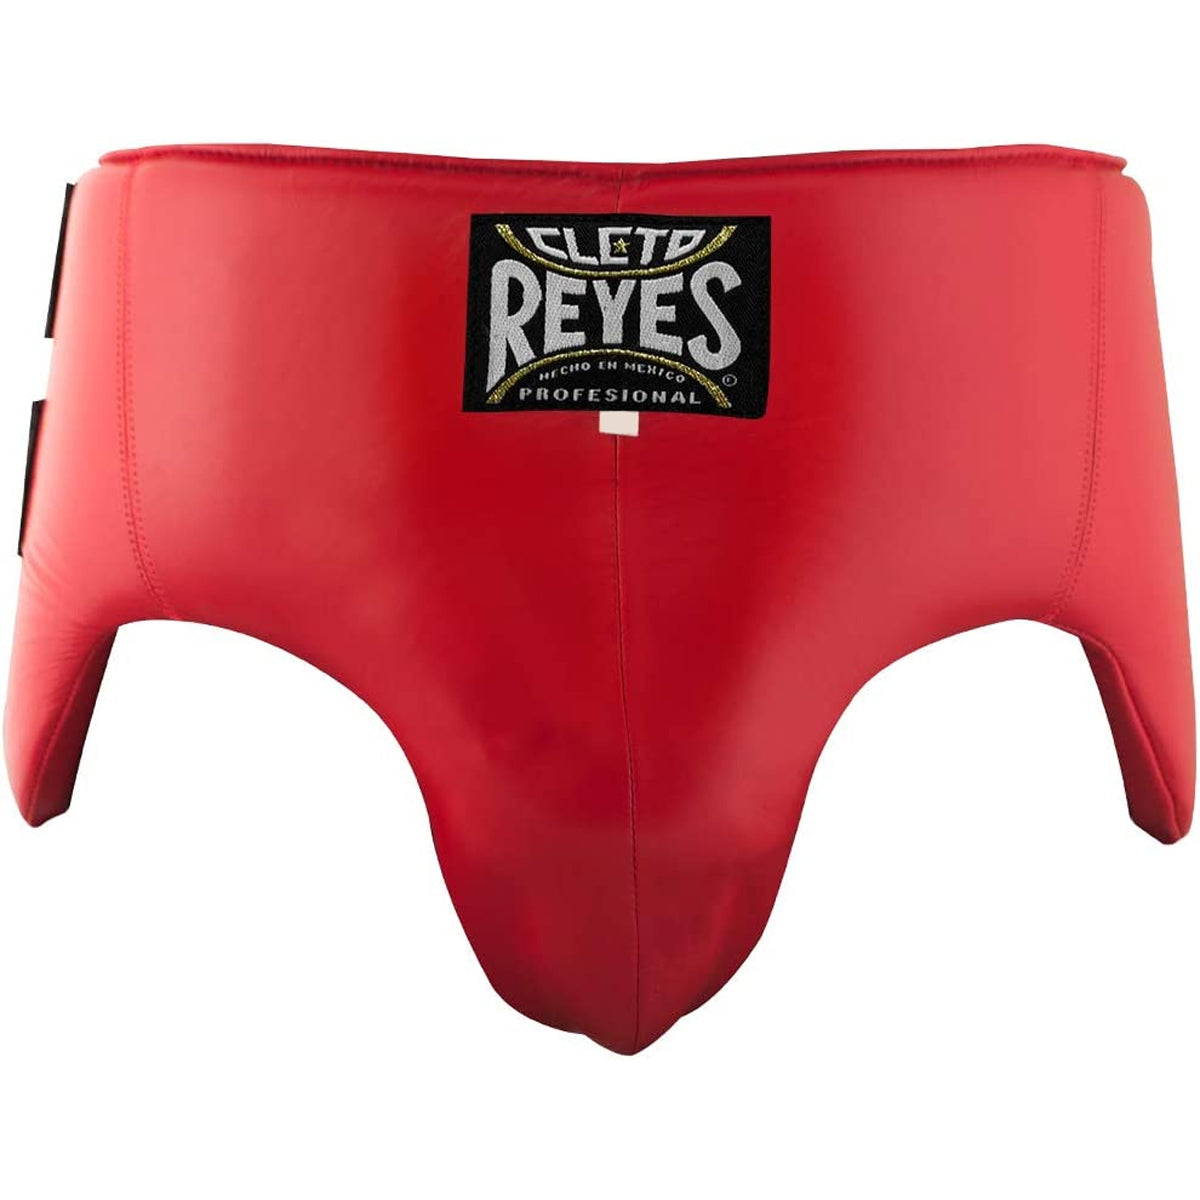 Cleto Reyes Kidney and Foul Padded Protective Cup - Medium (32-34") - Red Cleto Reyes